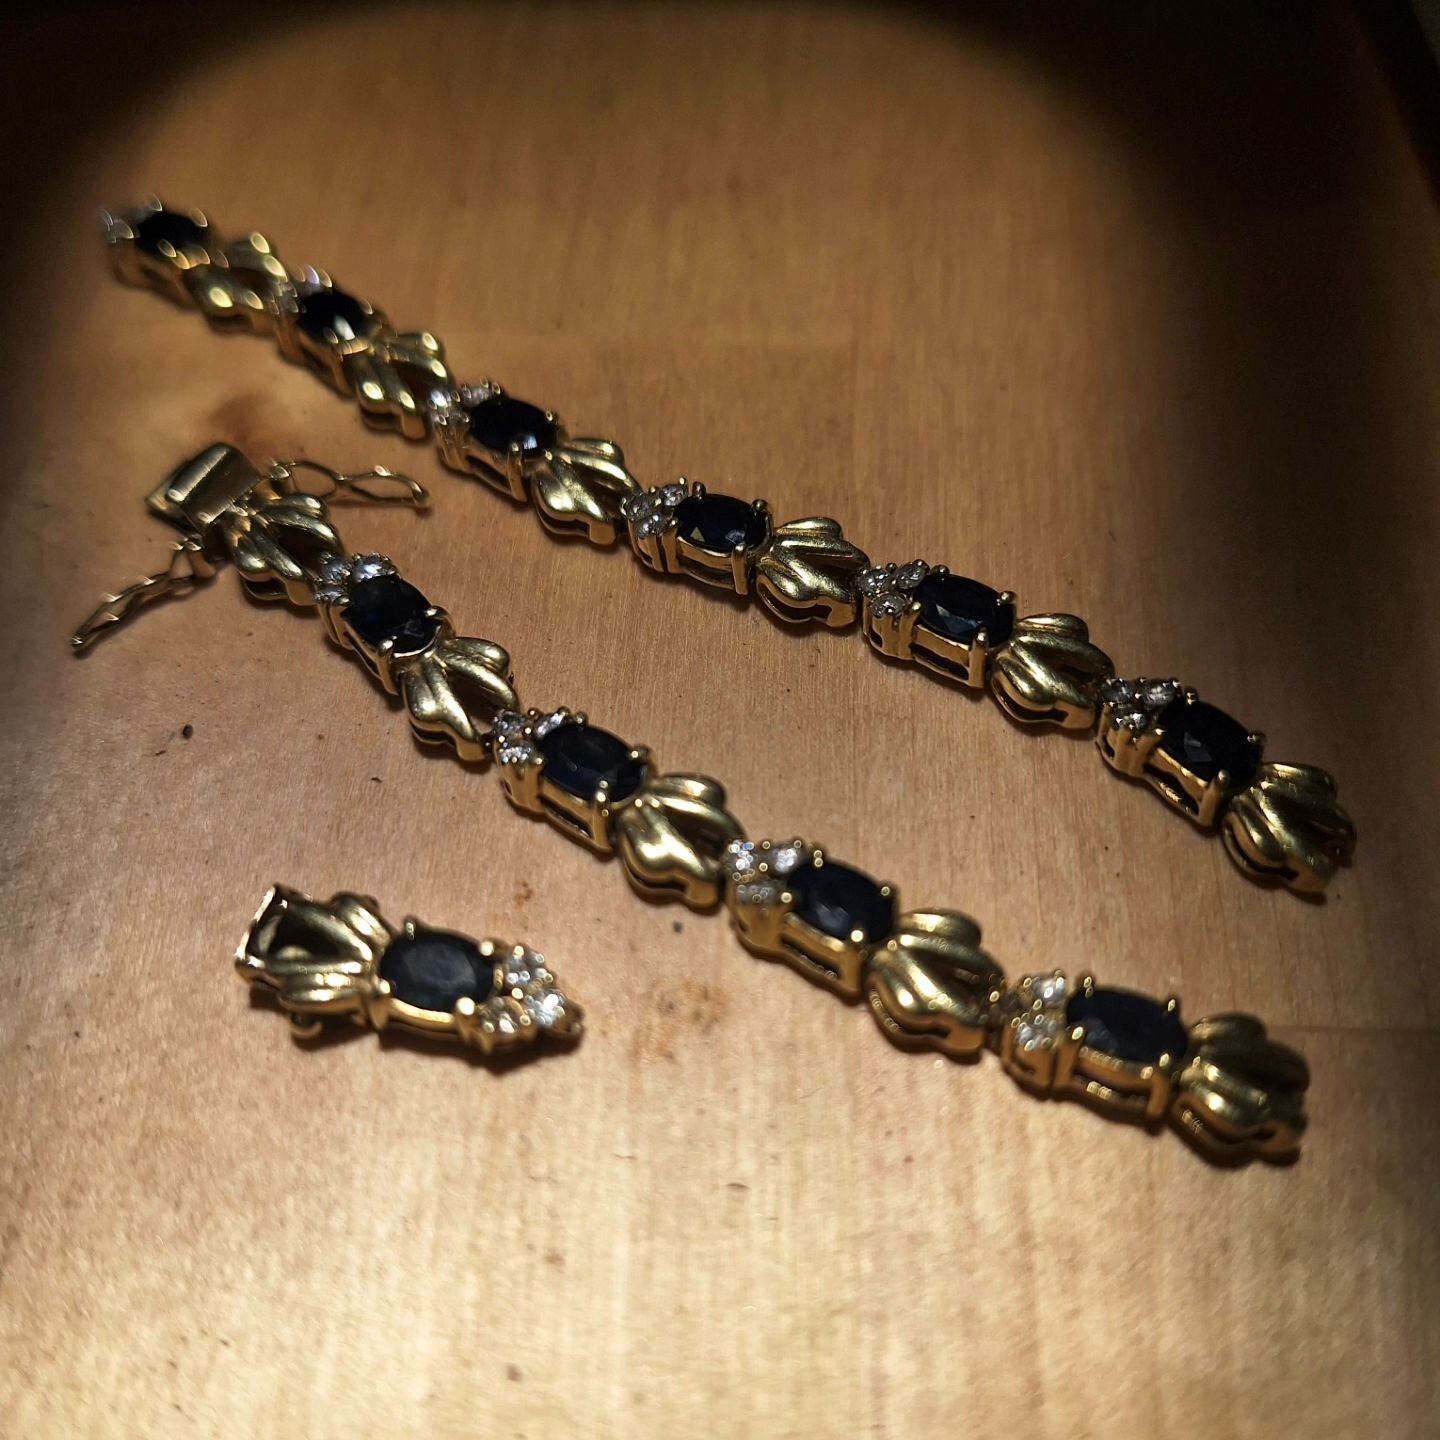 This much loved sapphire and diamond bracelet has been cherished for multiple generations, and the gold finally wore through on some of the links and a stone was missing. Two sections of links were rebuilt and repaired, and the missing diamond replac